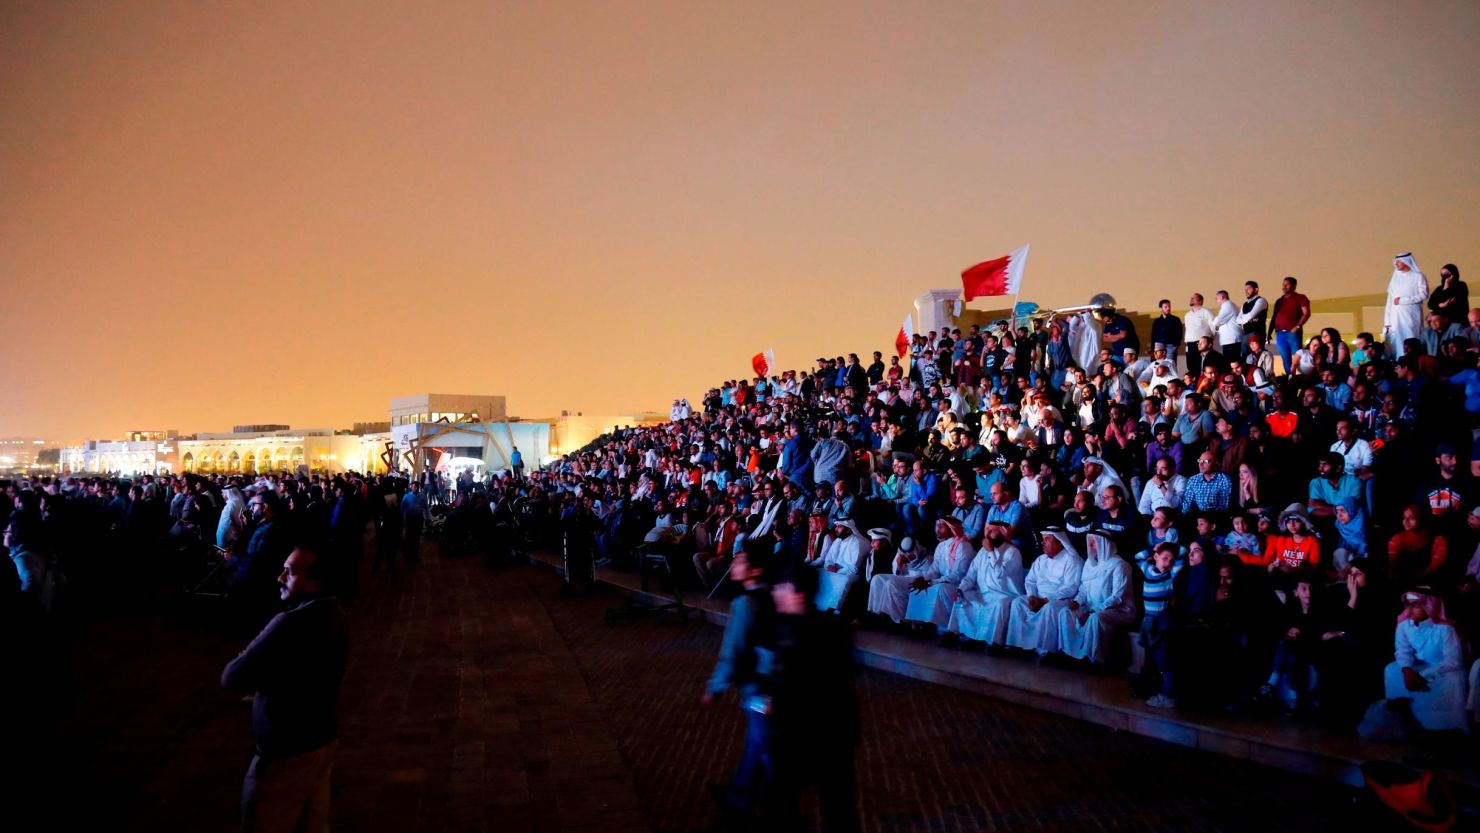 Qatari fans watch their national team play the UAE in the semifinal of the 2019 AFC Asian Cup.